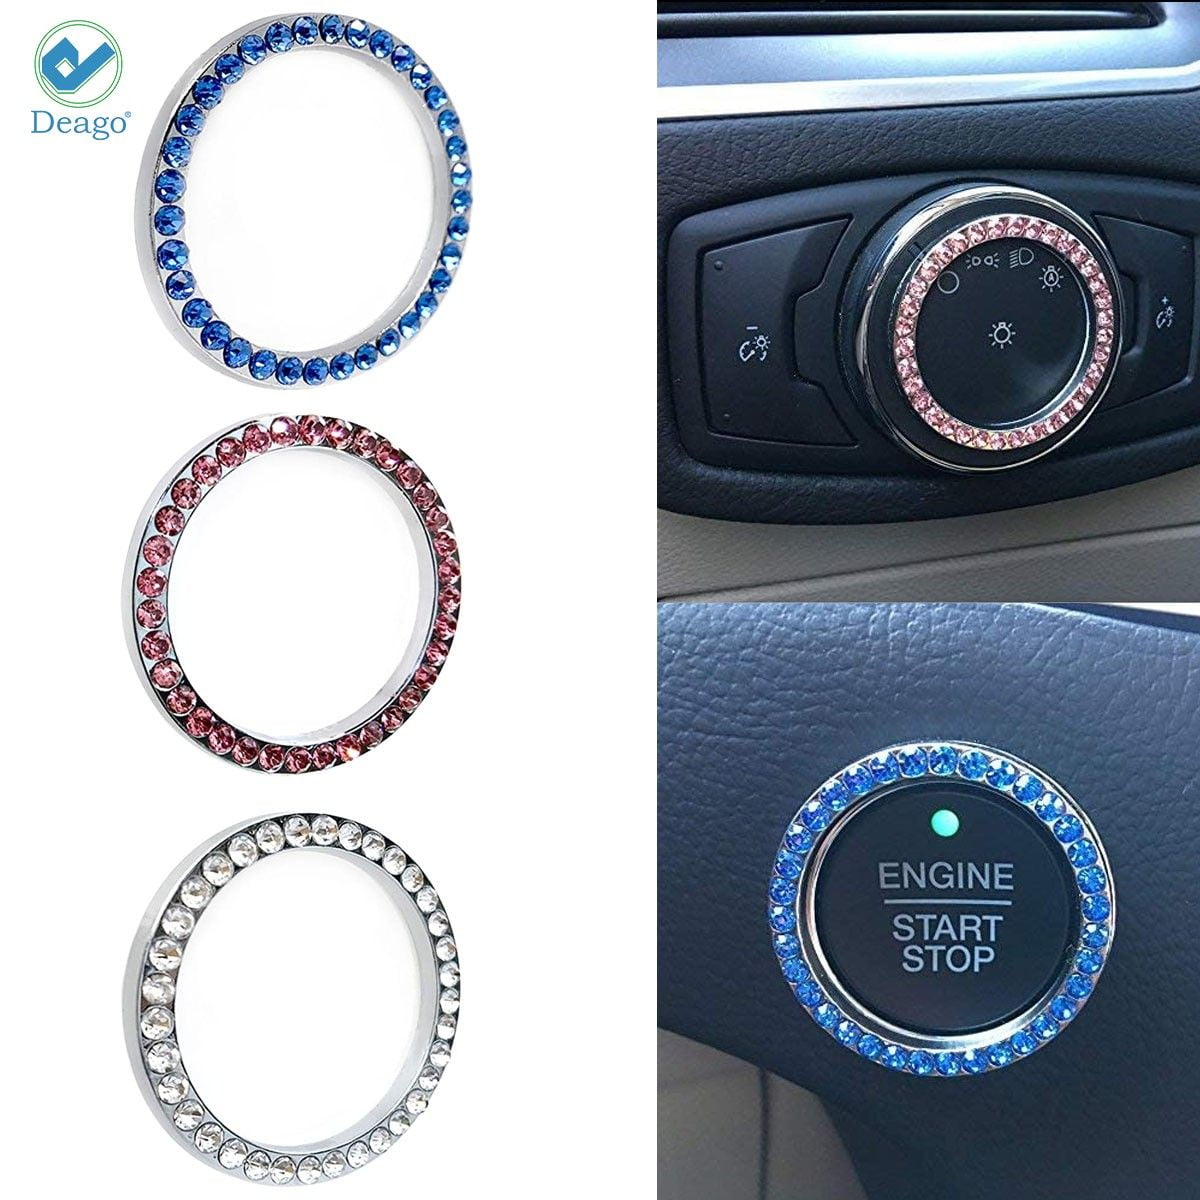 7 Pieces Car Bling Accessories Butterfly Vent Clips Decors Car Coasters Rear View Mirror Rhinestone Ball Hanging Ornament Car Bling Rings Emblem Stickers for Women Bright Color